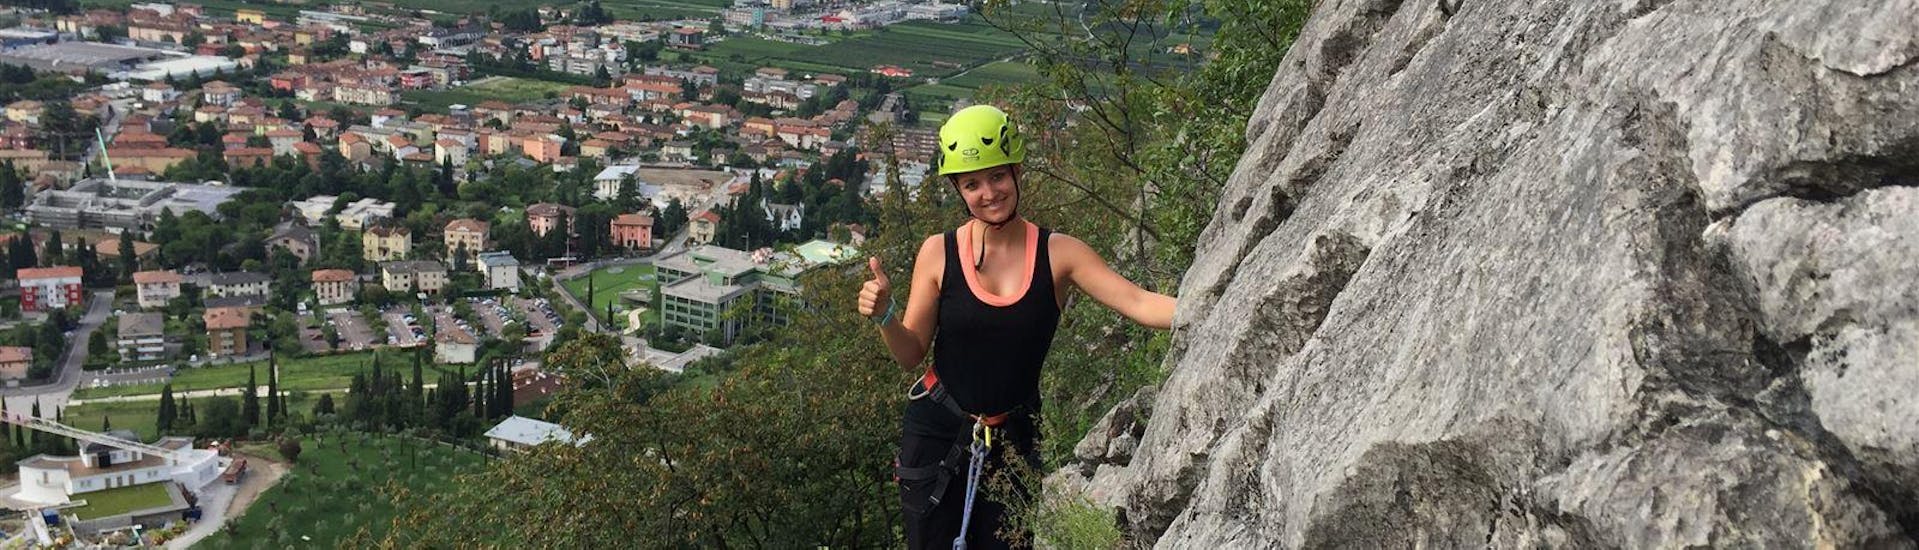 A group of participants is having fun during the Via Ferrata 92° Congresso - First Experience with Mmove - Into Nature Garda Lake.